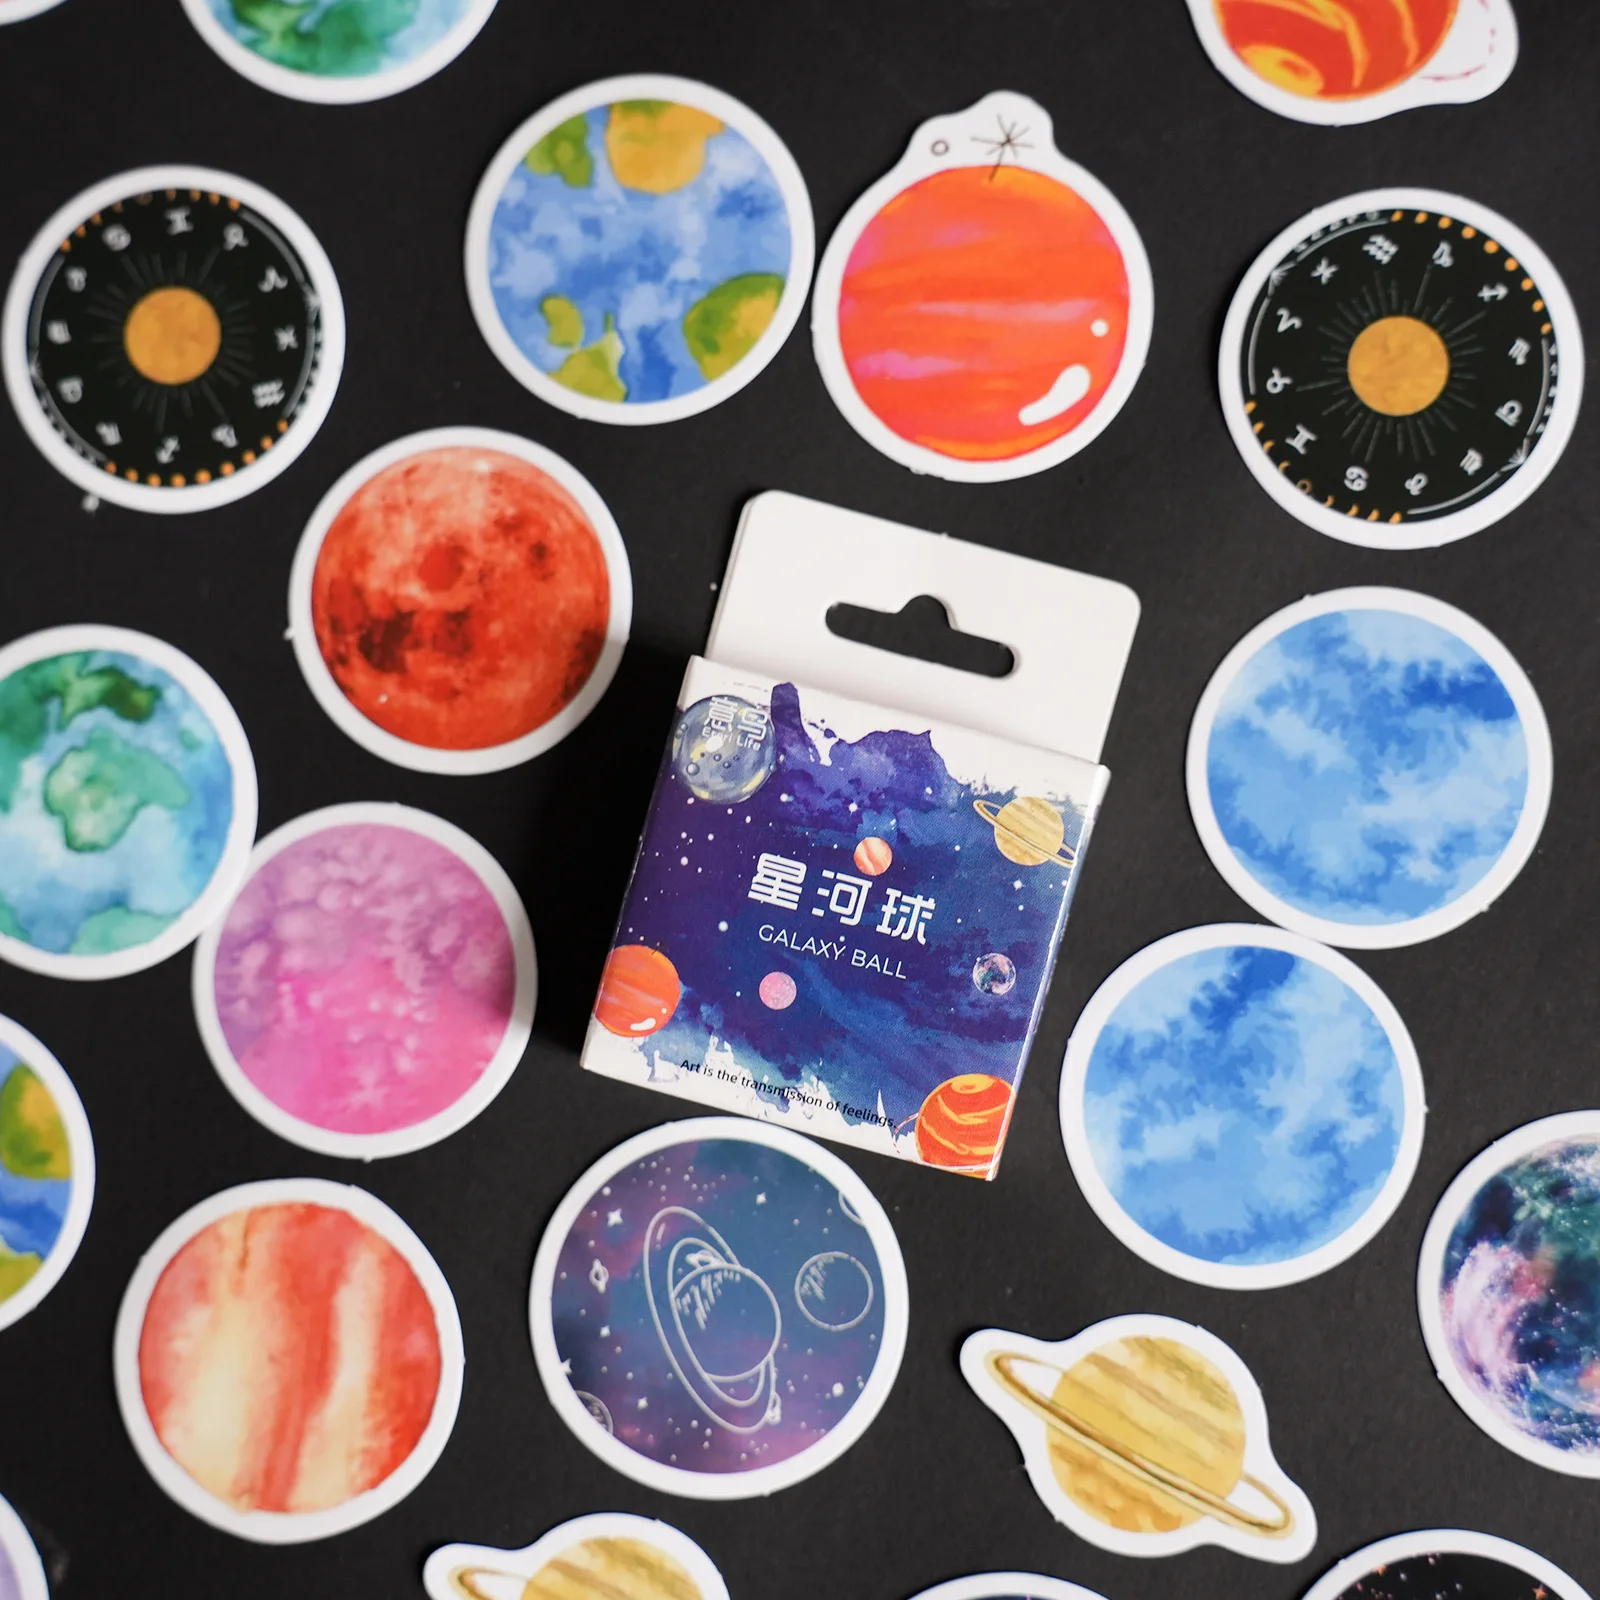 

46Pcs Dream Planet Stickers Scrapbook Decorative Aesthetic For Journaling Supplies Card Making Diary Notebook